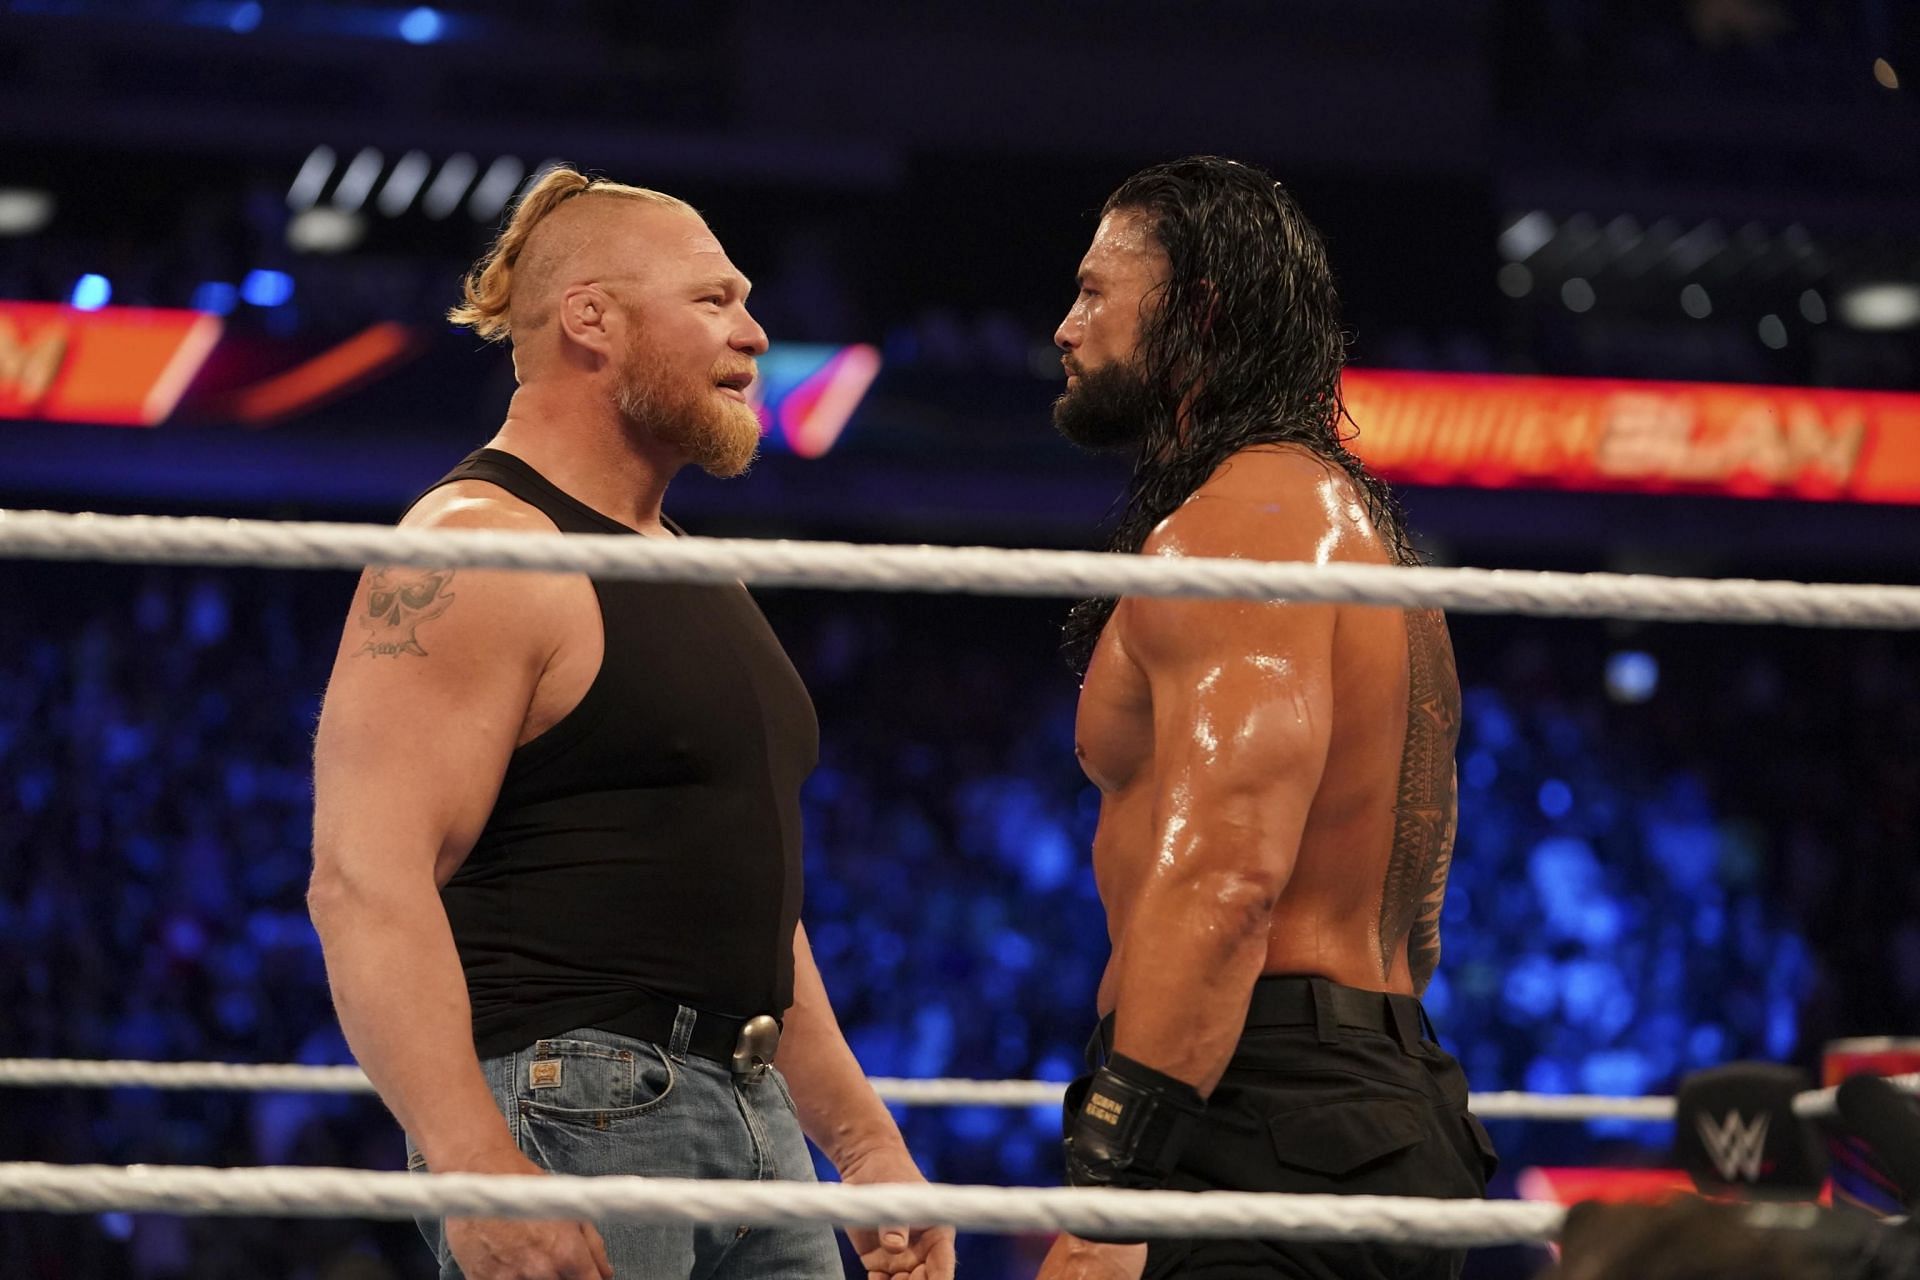 Brock Lesnar (left) and Roman Reigns (right)